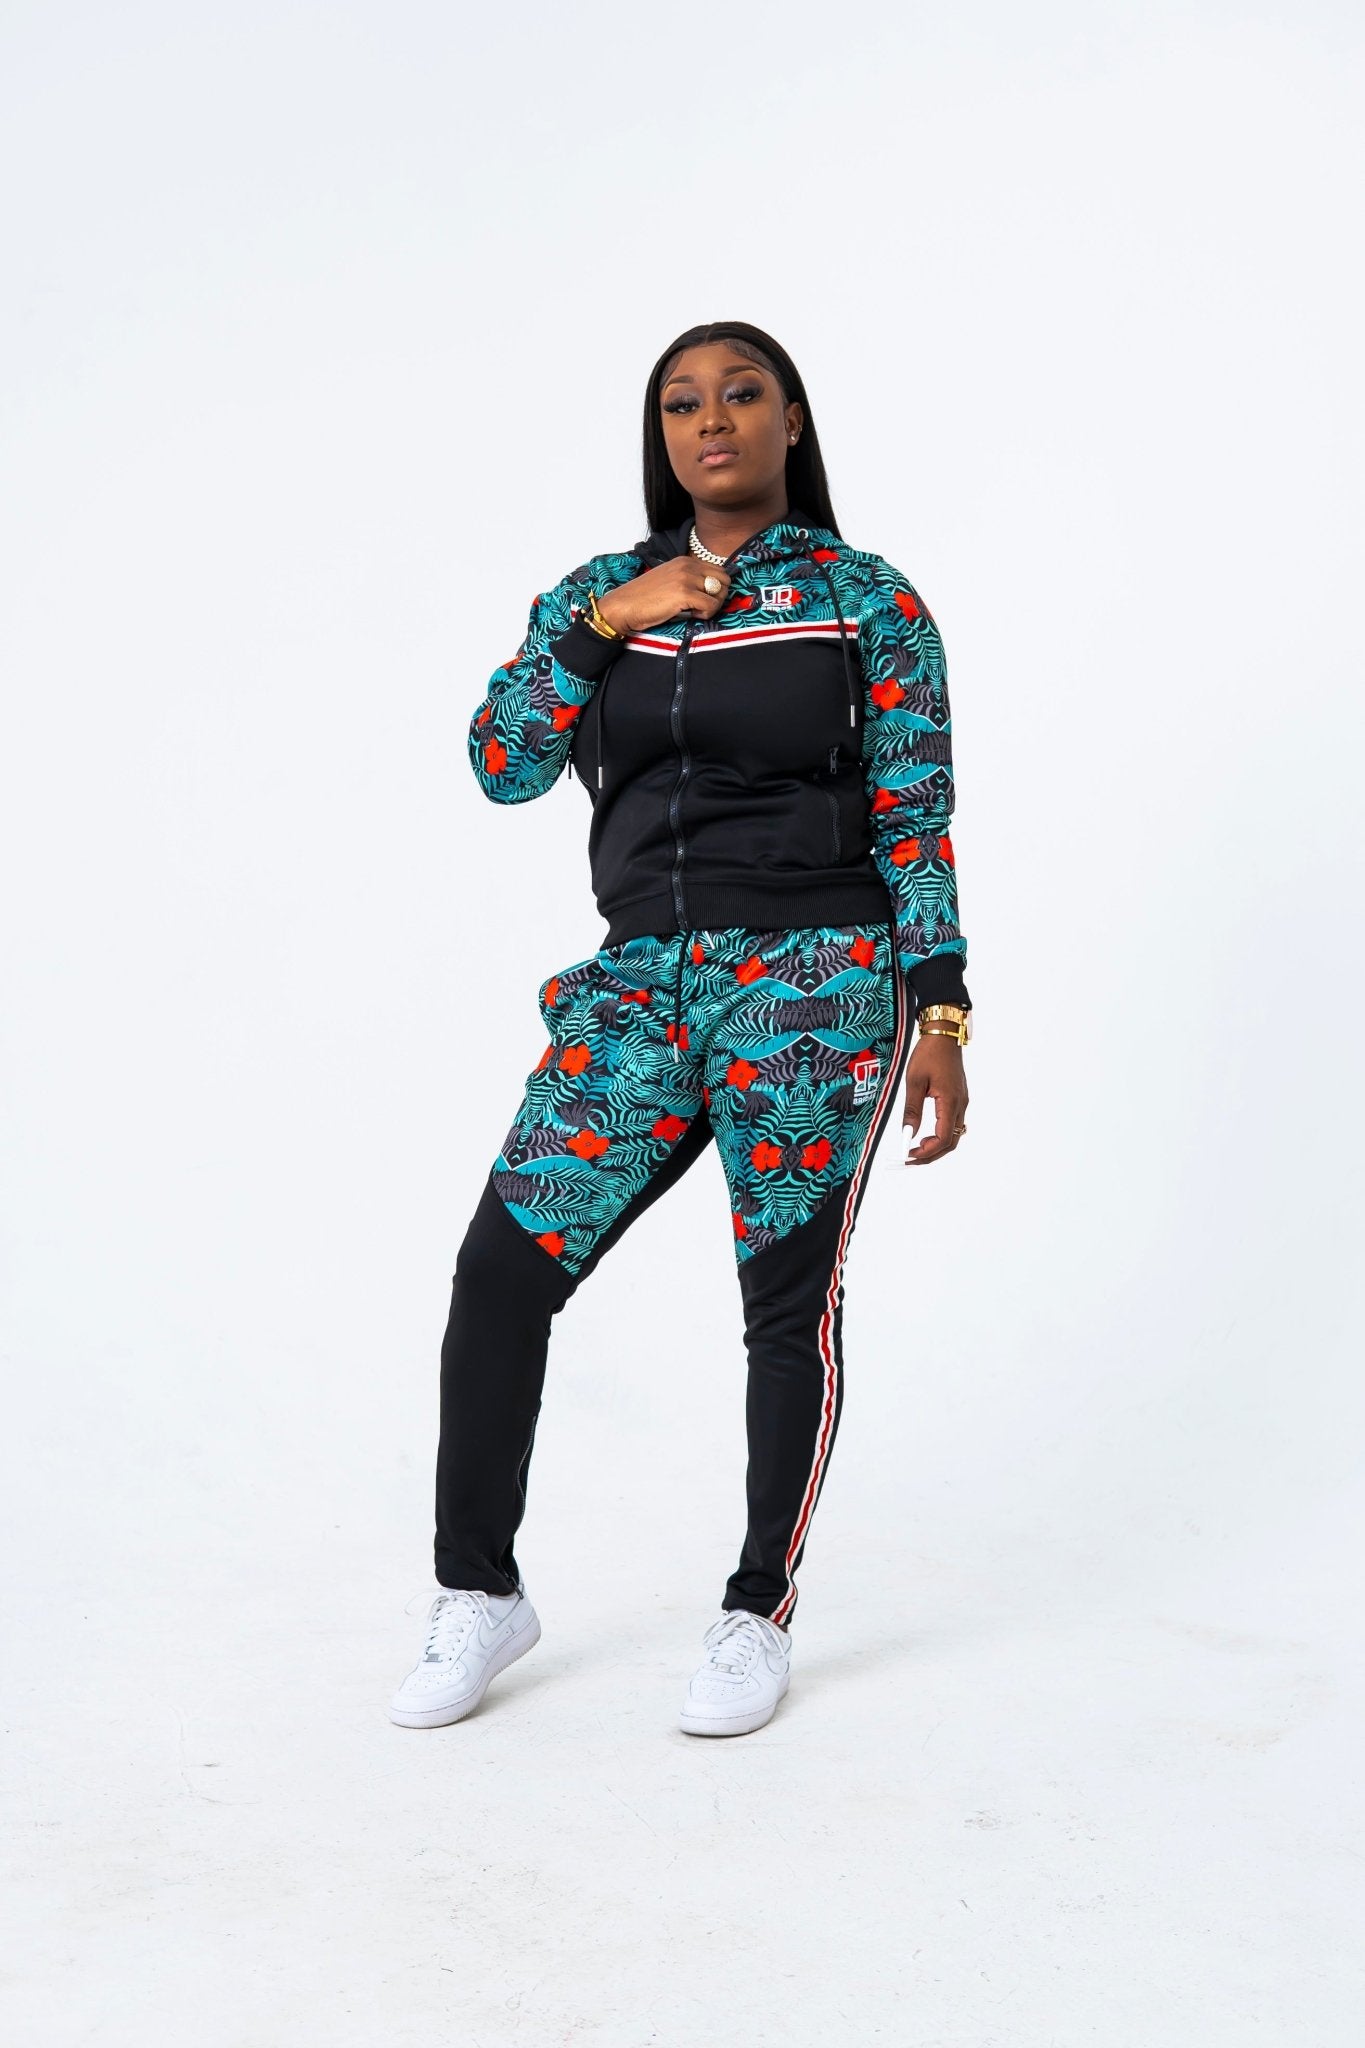 Nike Red Tropical Hyper Femme Print Tracksuit Bottoms